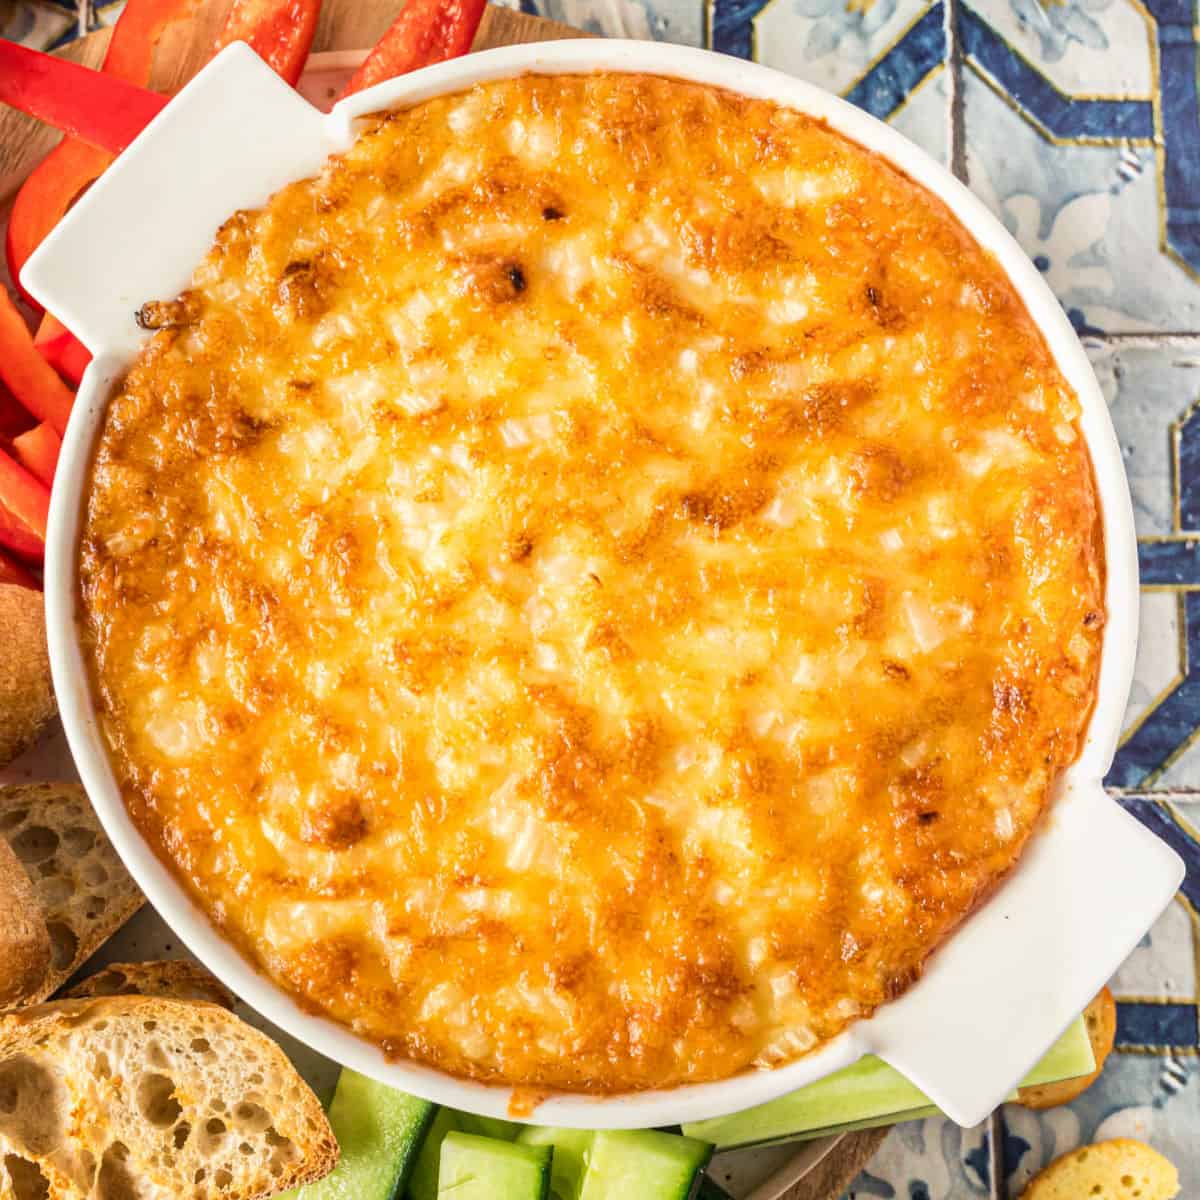 square image of hot onion & cheese dip with golden brown top in a casserole dish